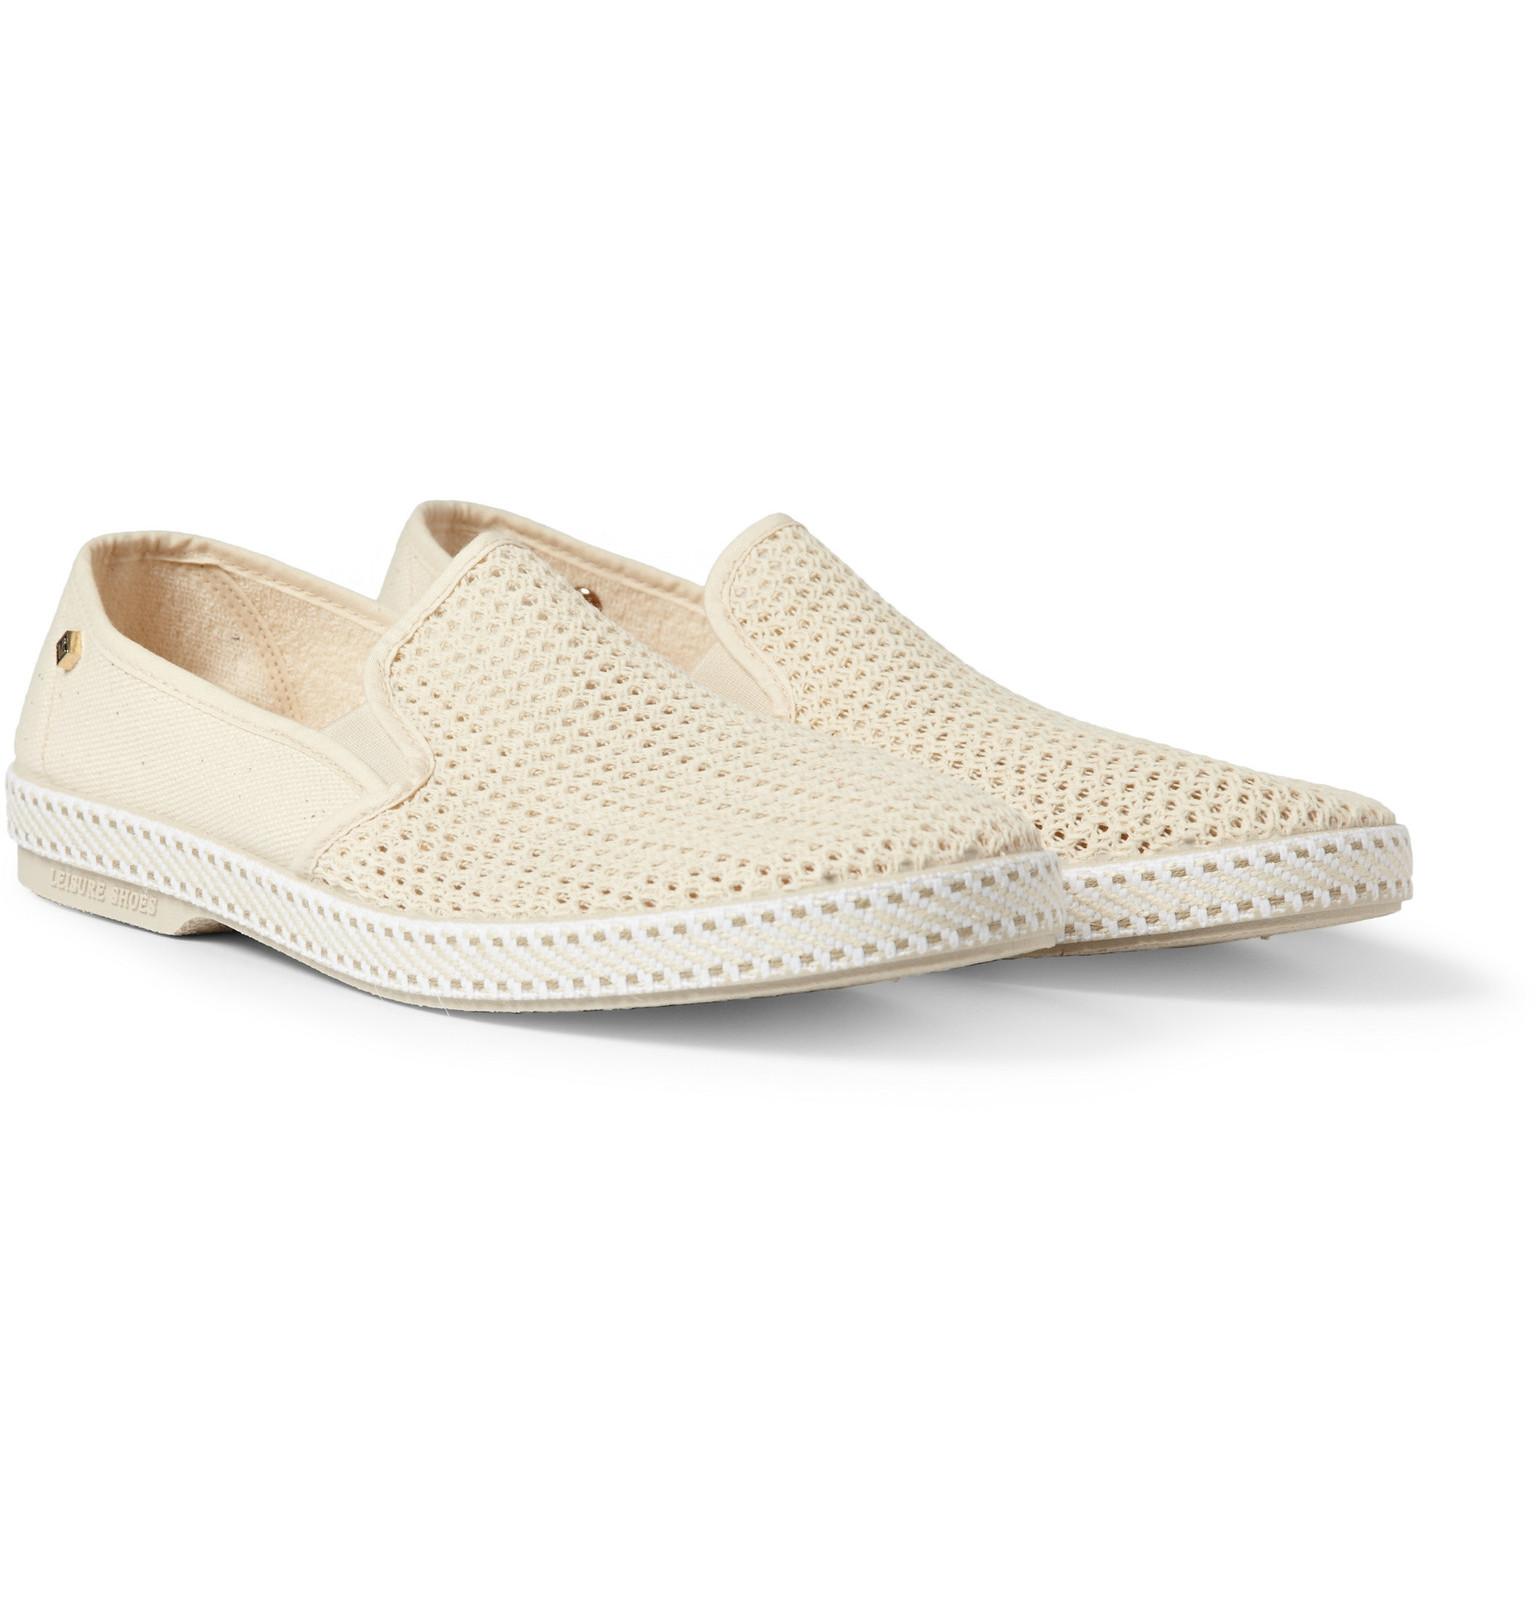 Rivieras Cotton Mesh Slip-On Shoes in Natural for Men - Lyst